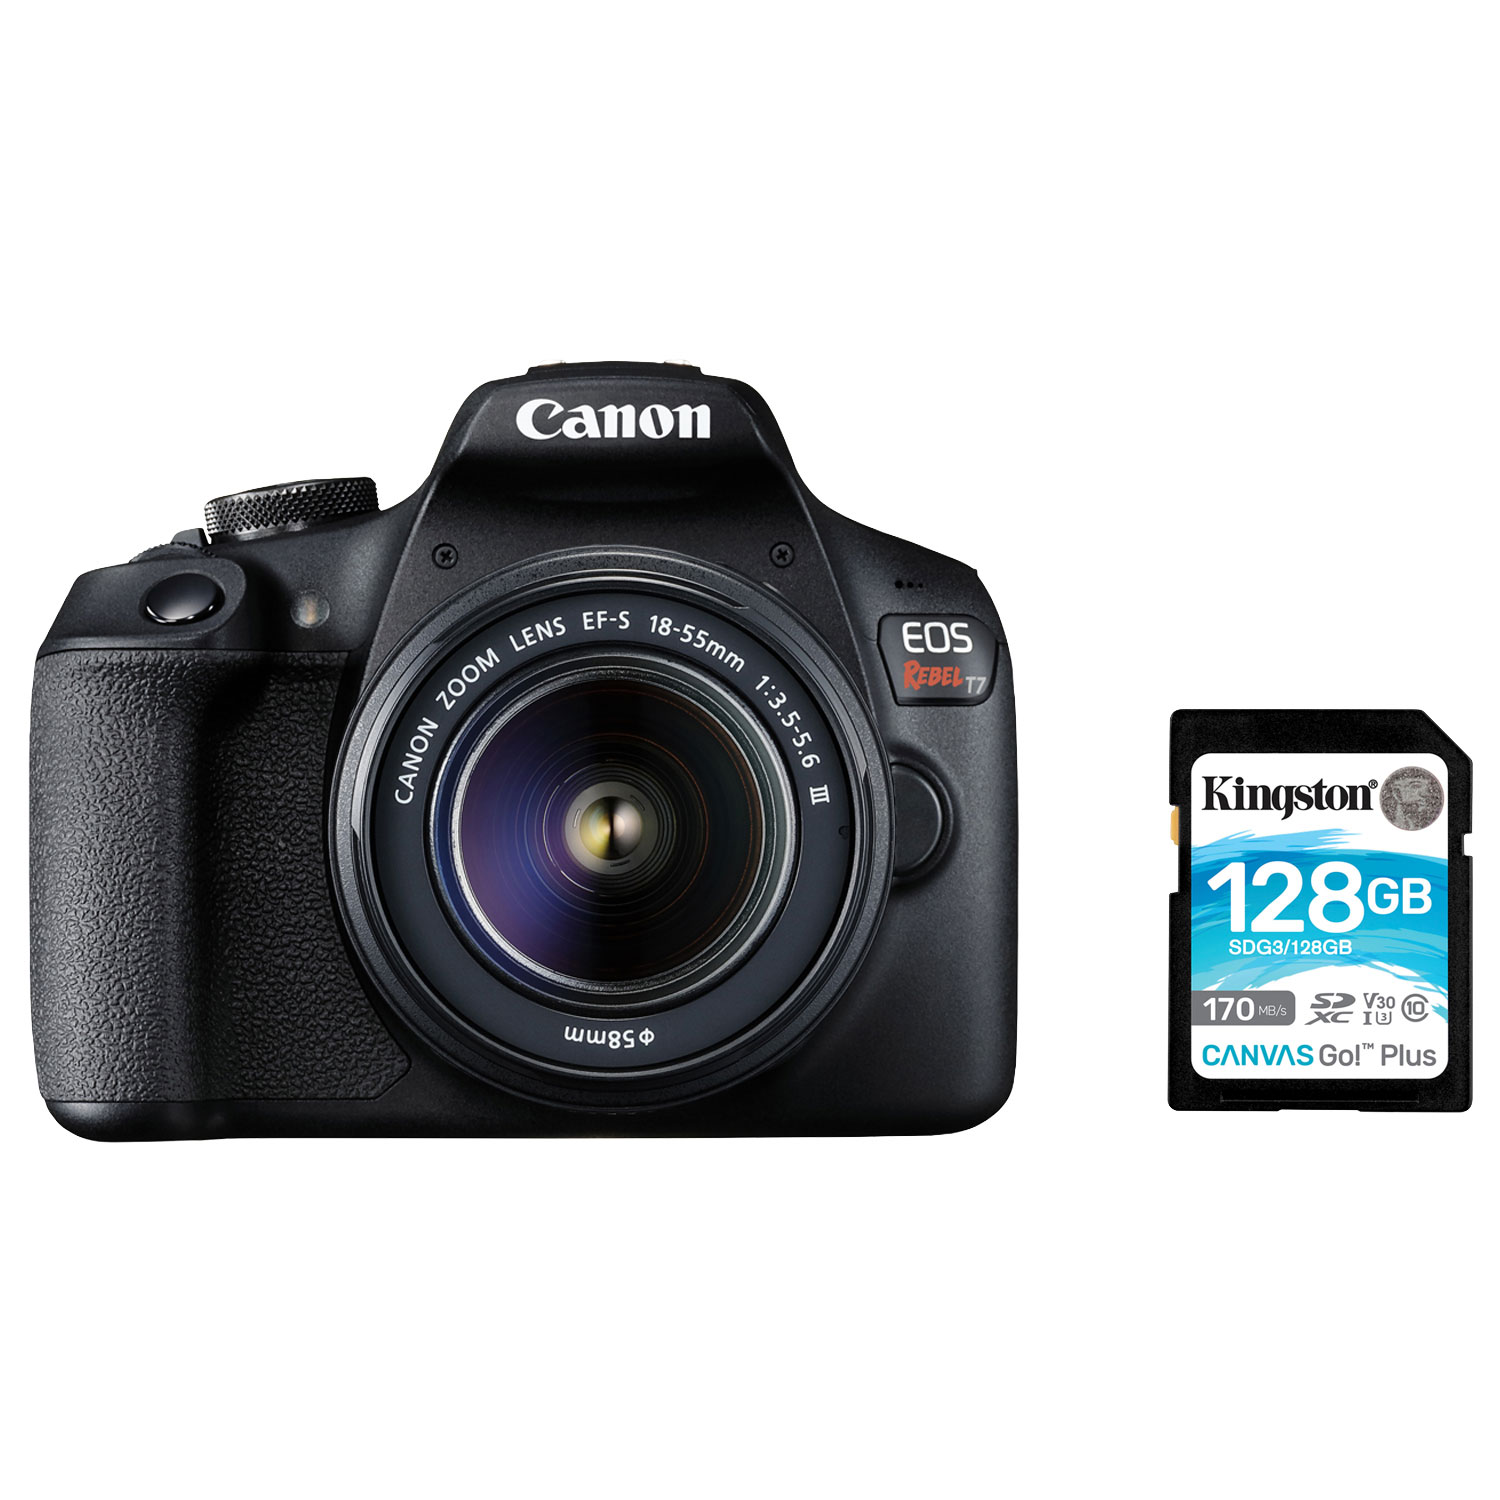 Canon EOS Rebel T7 DSLR Camera with 18-55mm Lens Kit & 128GB 170MB/s SDXC Memory Card